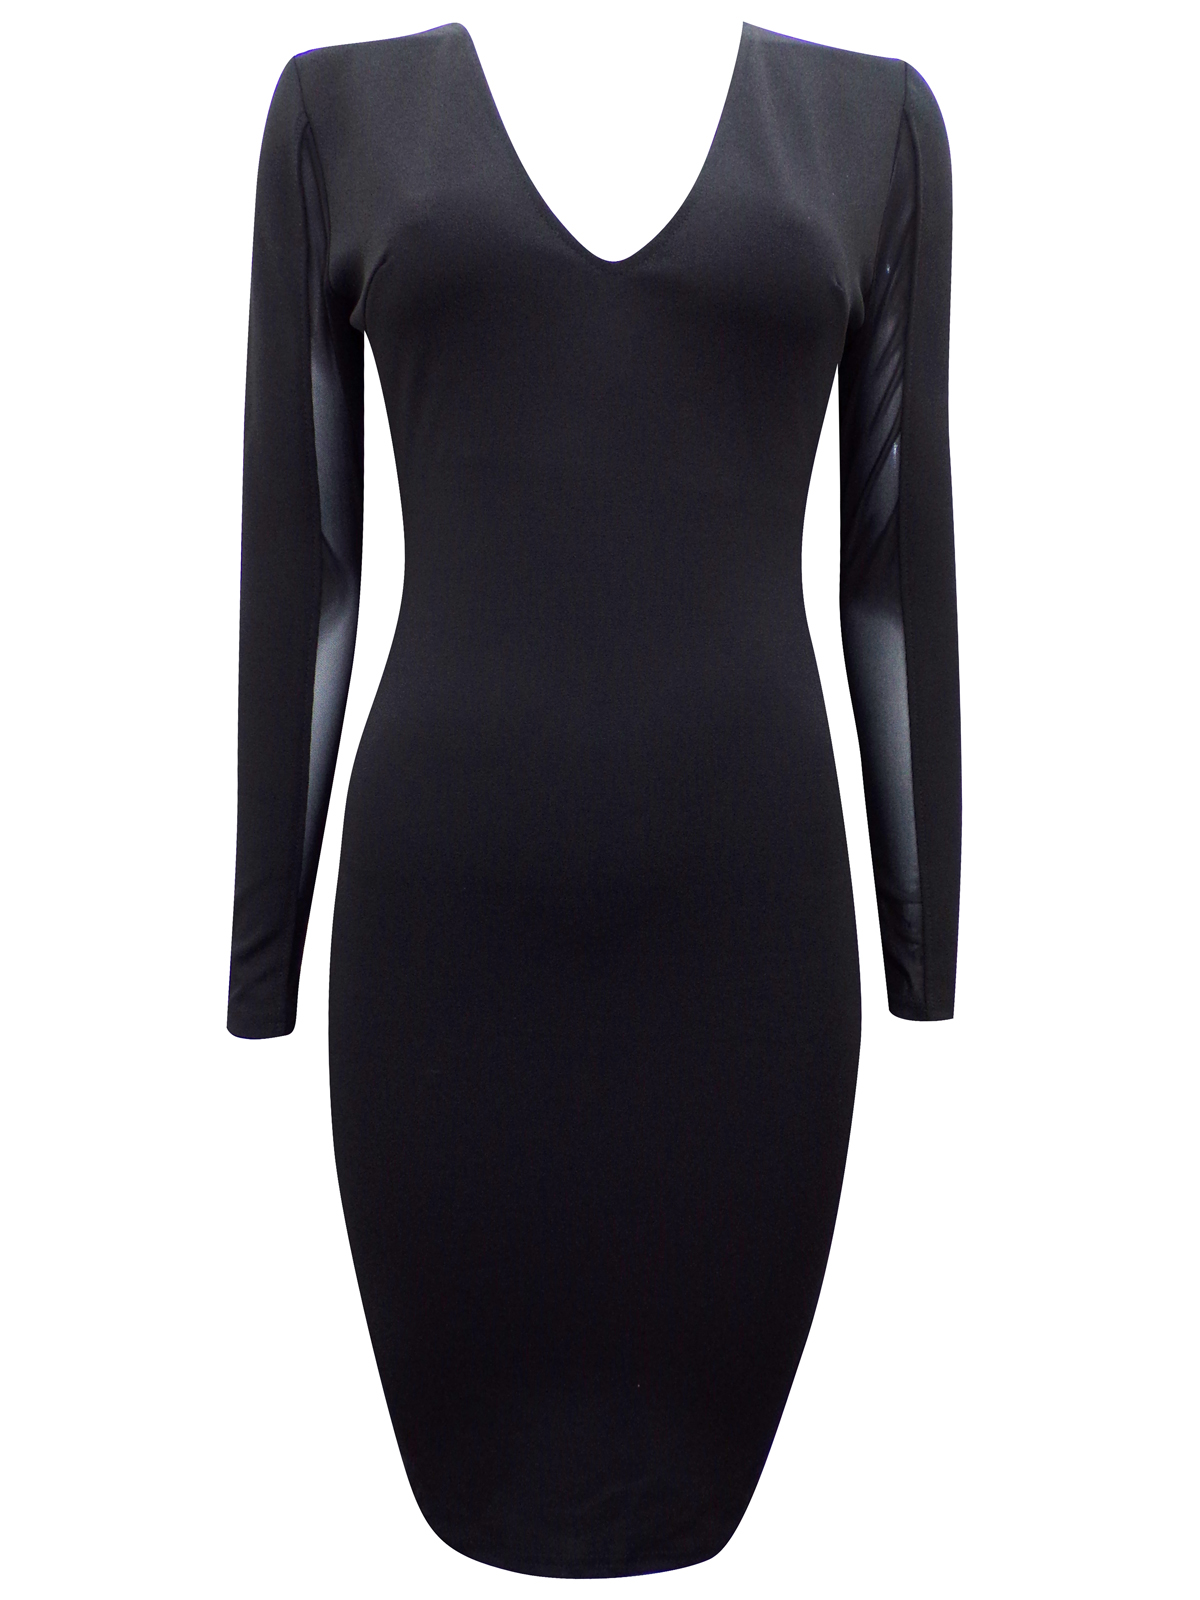 Nly One - - NlyOne BLACK Mesh Panel Bodycon Dress - Size Small to XLarge